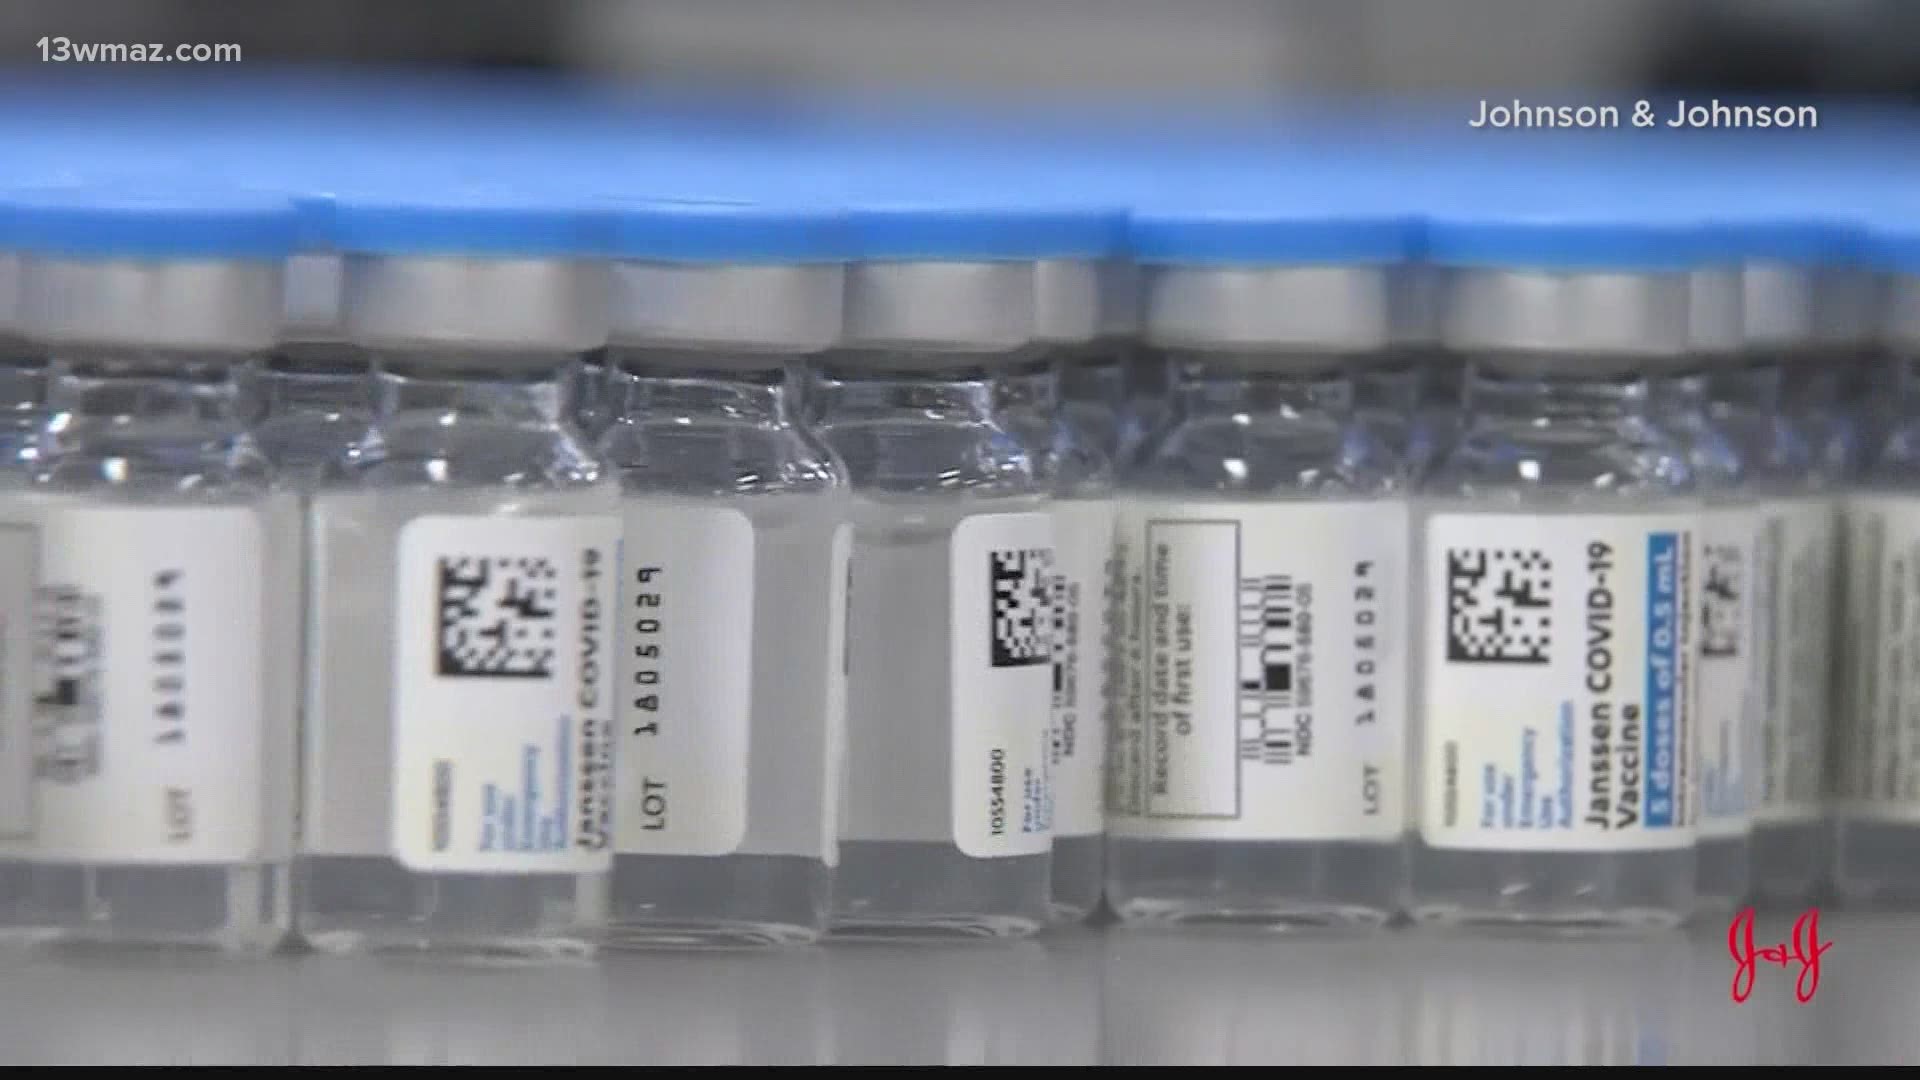 A third vaccine will soon be in the mix here in Georgia after Johnson & Johnson's single-dose vaccine received federal emergency use authorization from the FDA.